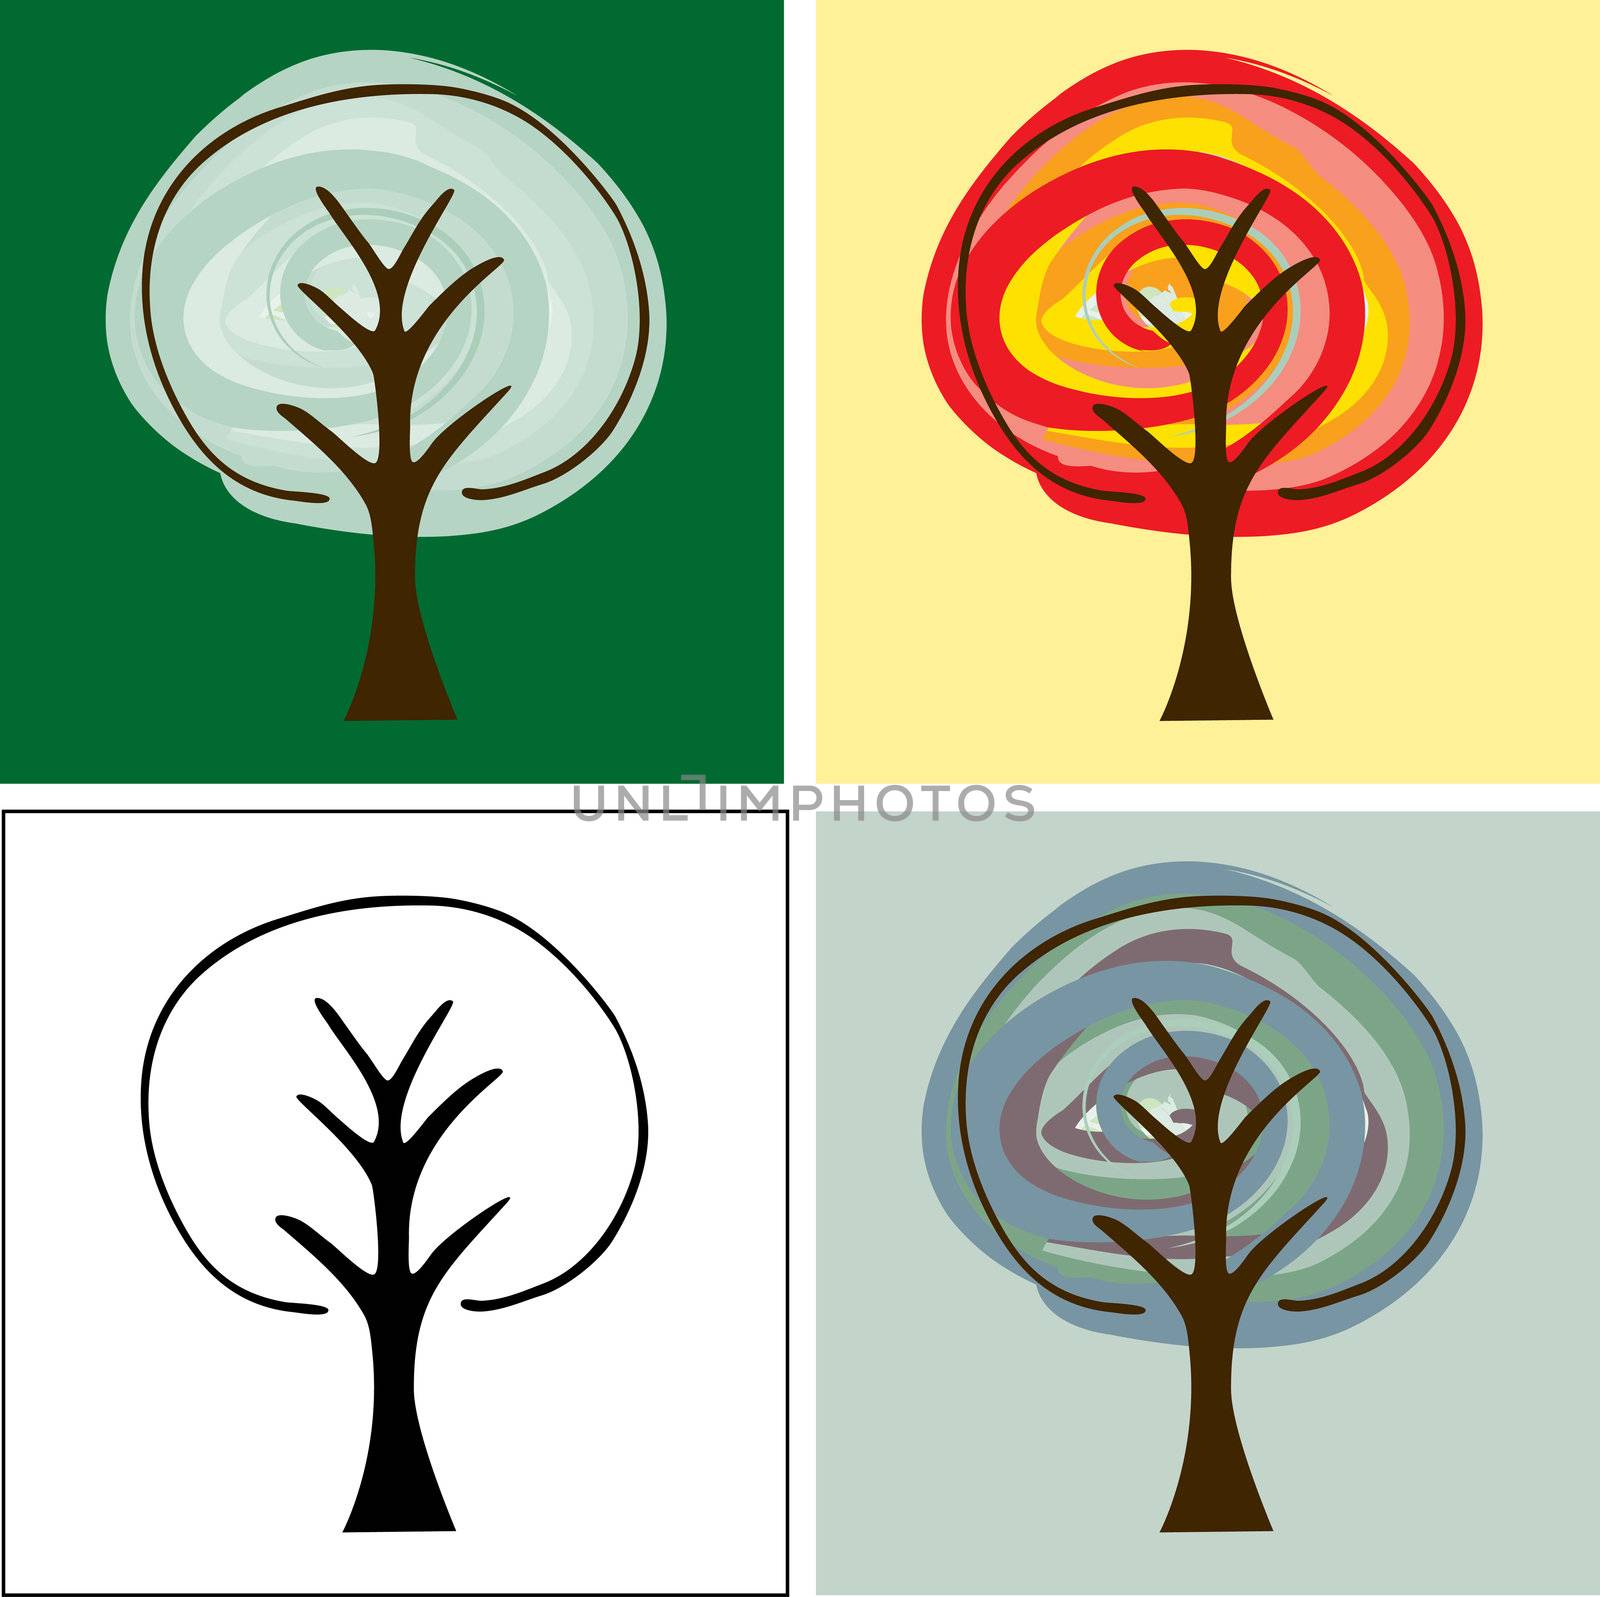 Set of four abstract tree illustrations for backgrounds, logos or icons